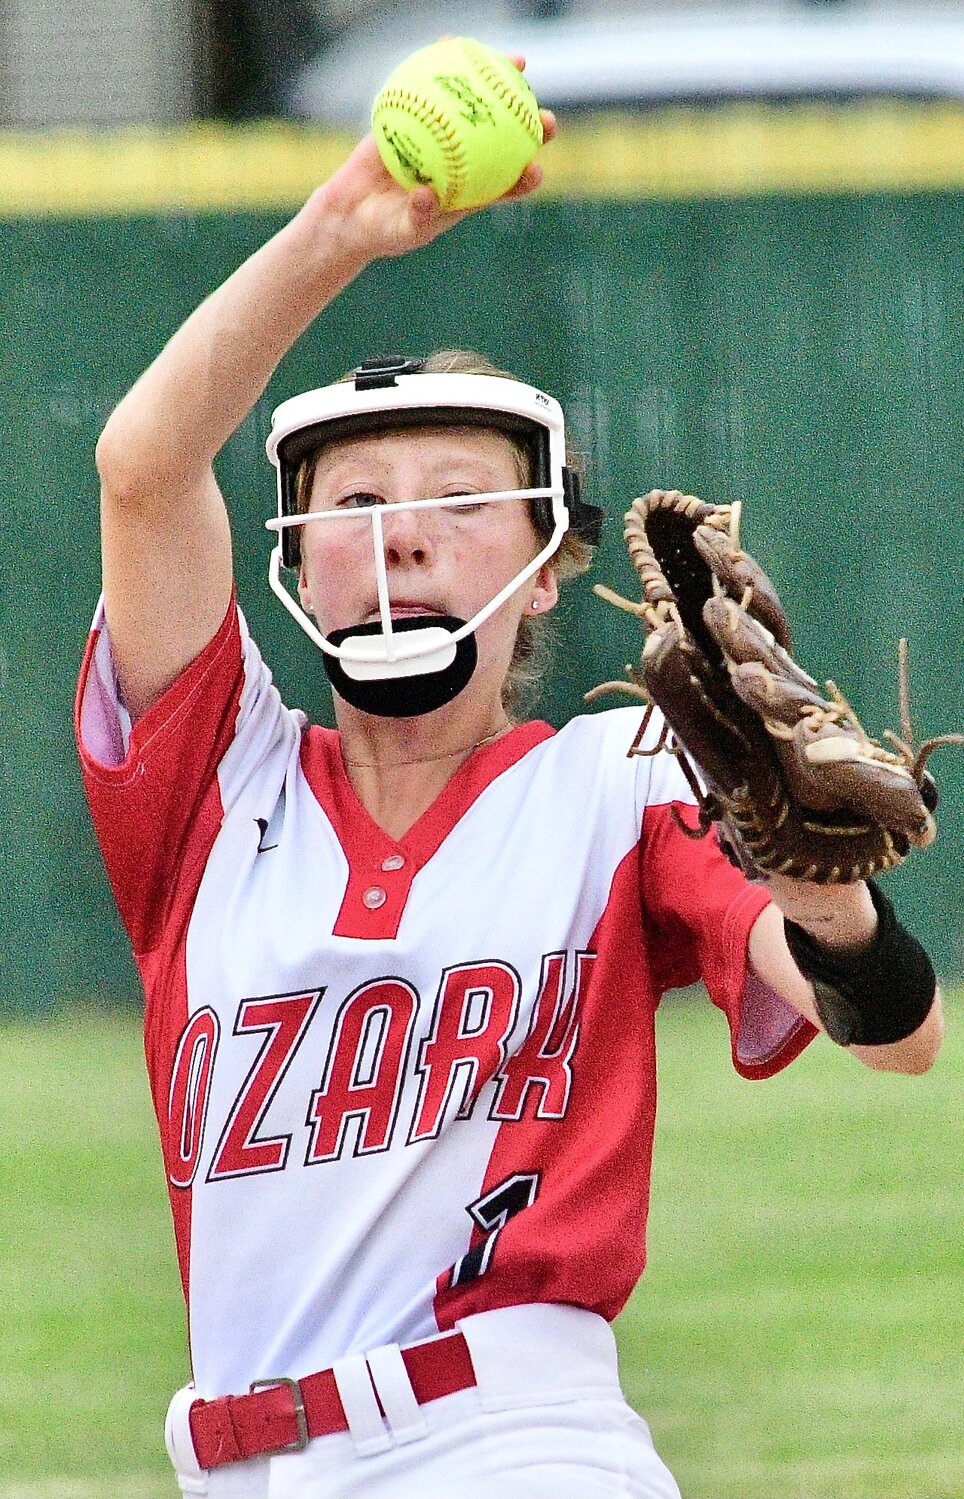 OZARK'S ADDI LEWIS eyes a delivery home.